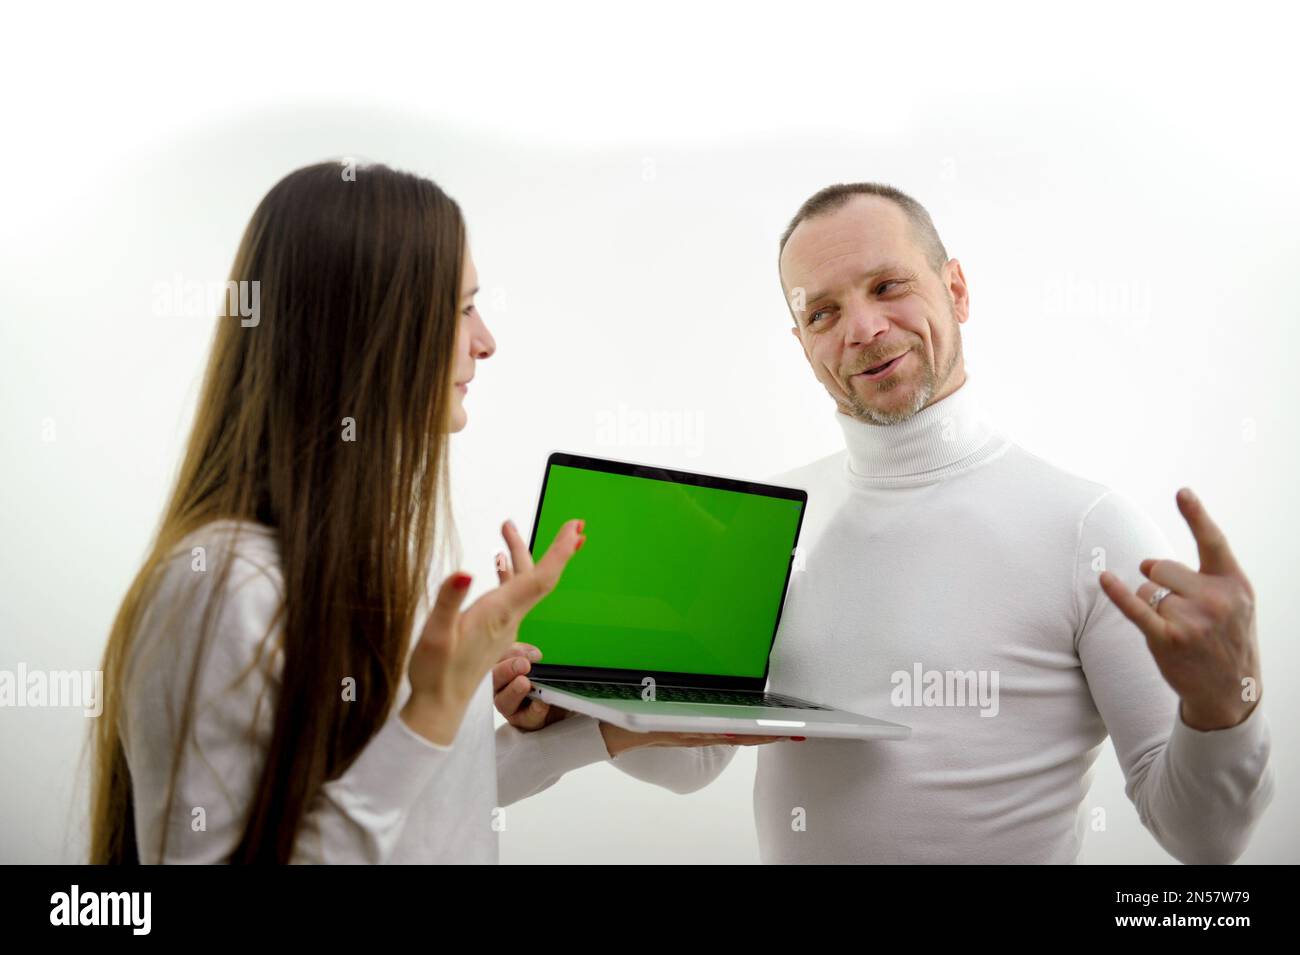 man and girl near laptop with green screen chromakey dressed white background man tells to student teacher she listens to new information online learning interest entertainment communication Stock Photo